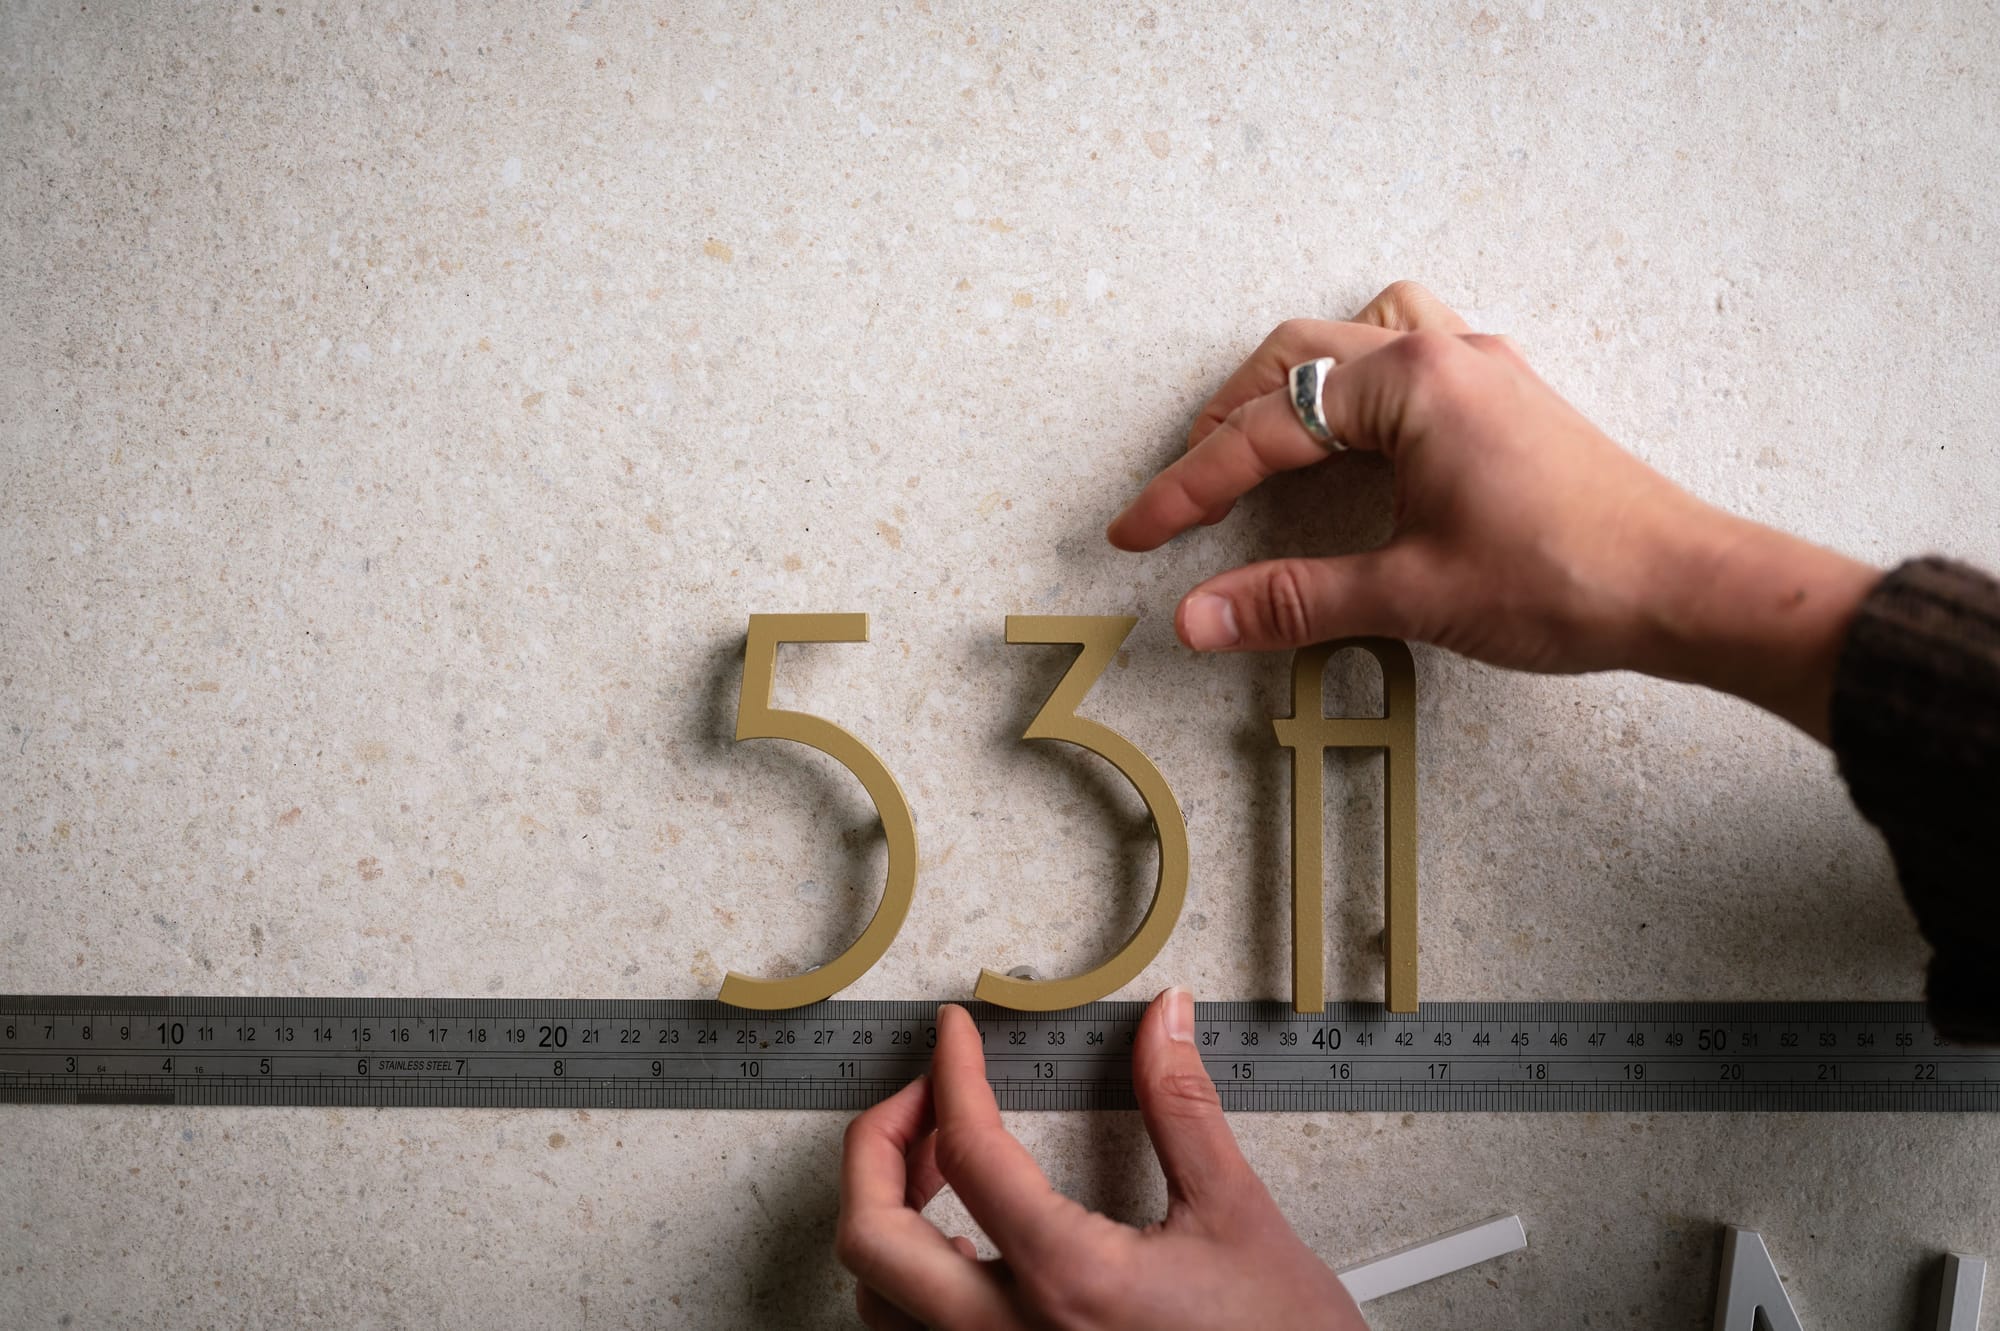 Peninsula House Numbers. Image copyright of Peninsula House Numbers. Brass house numbers being arranged in line above ruler.